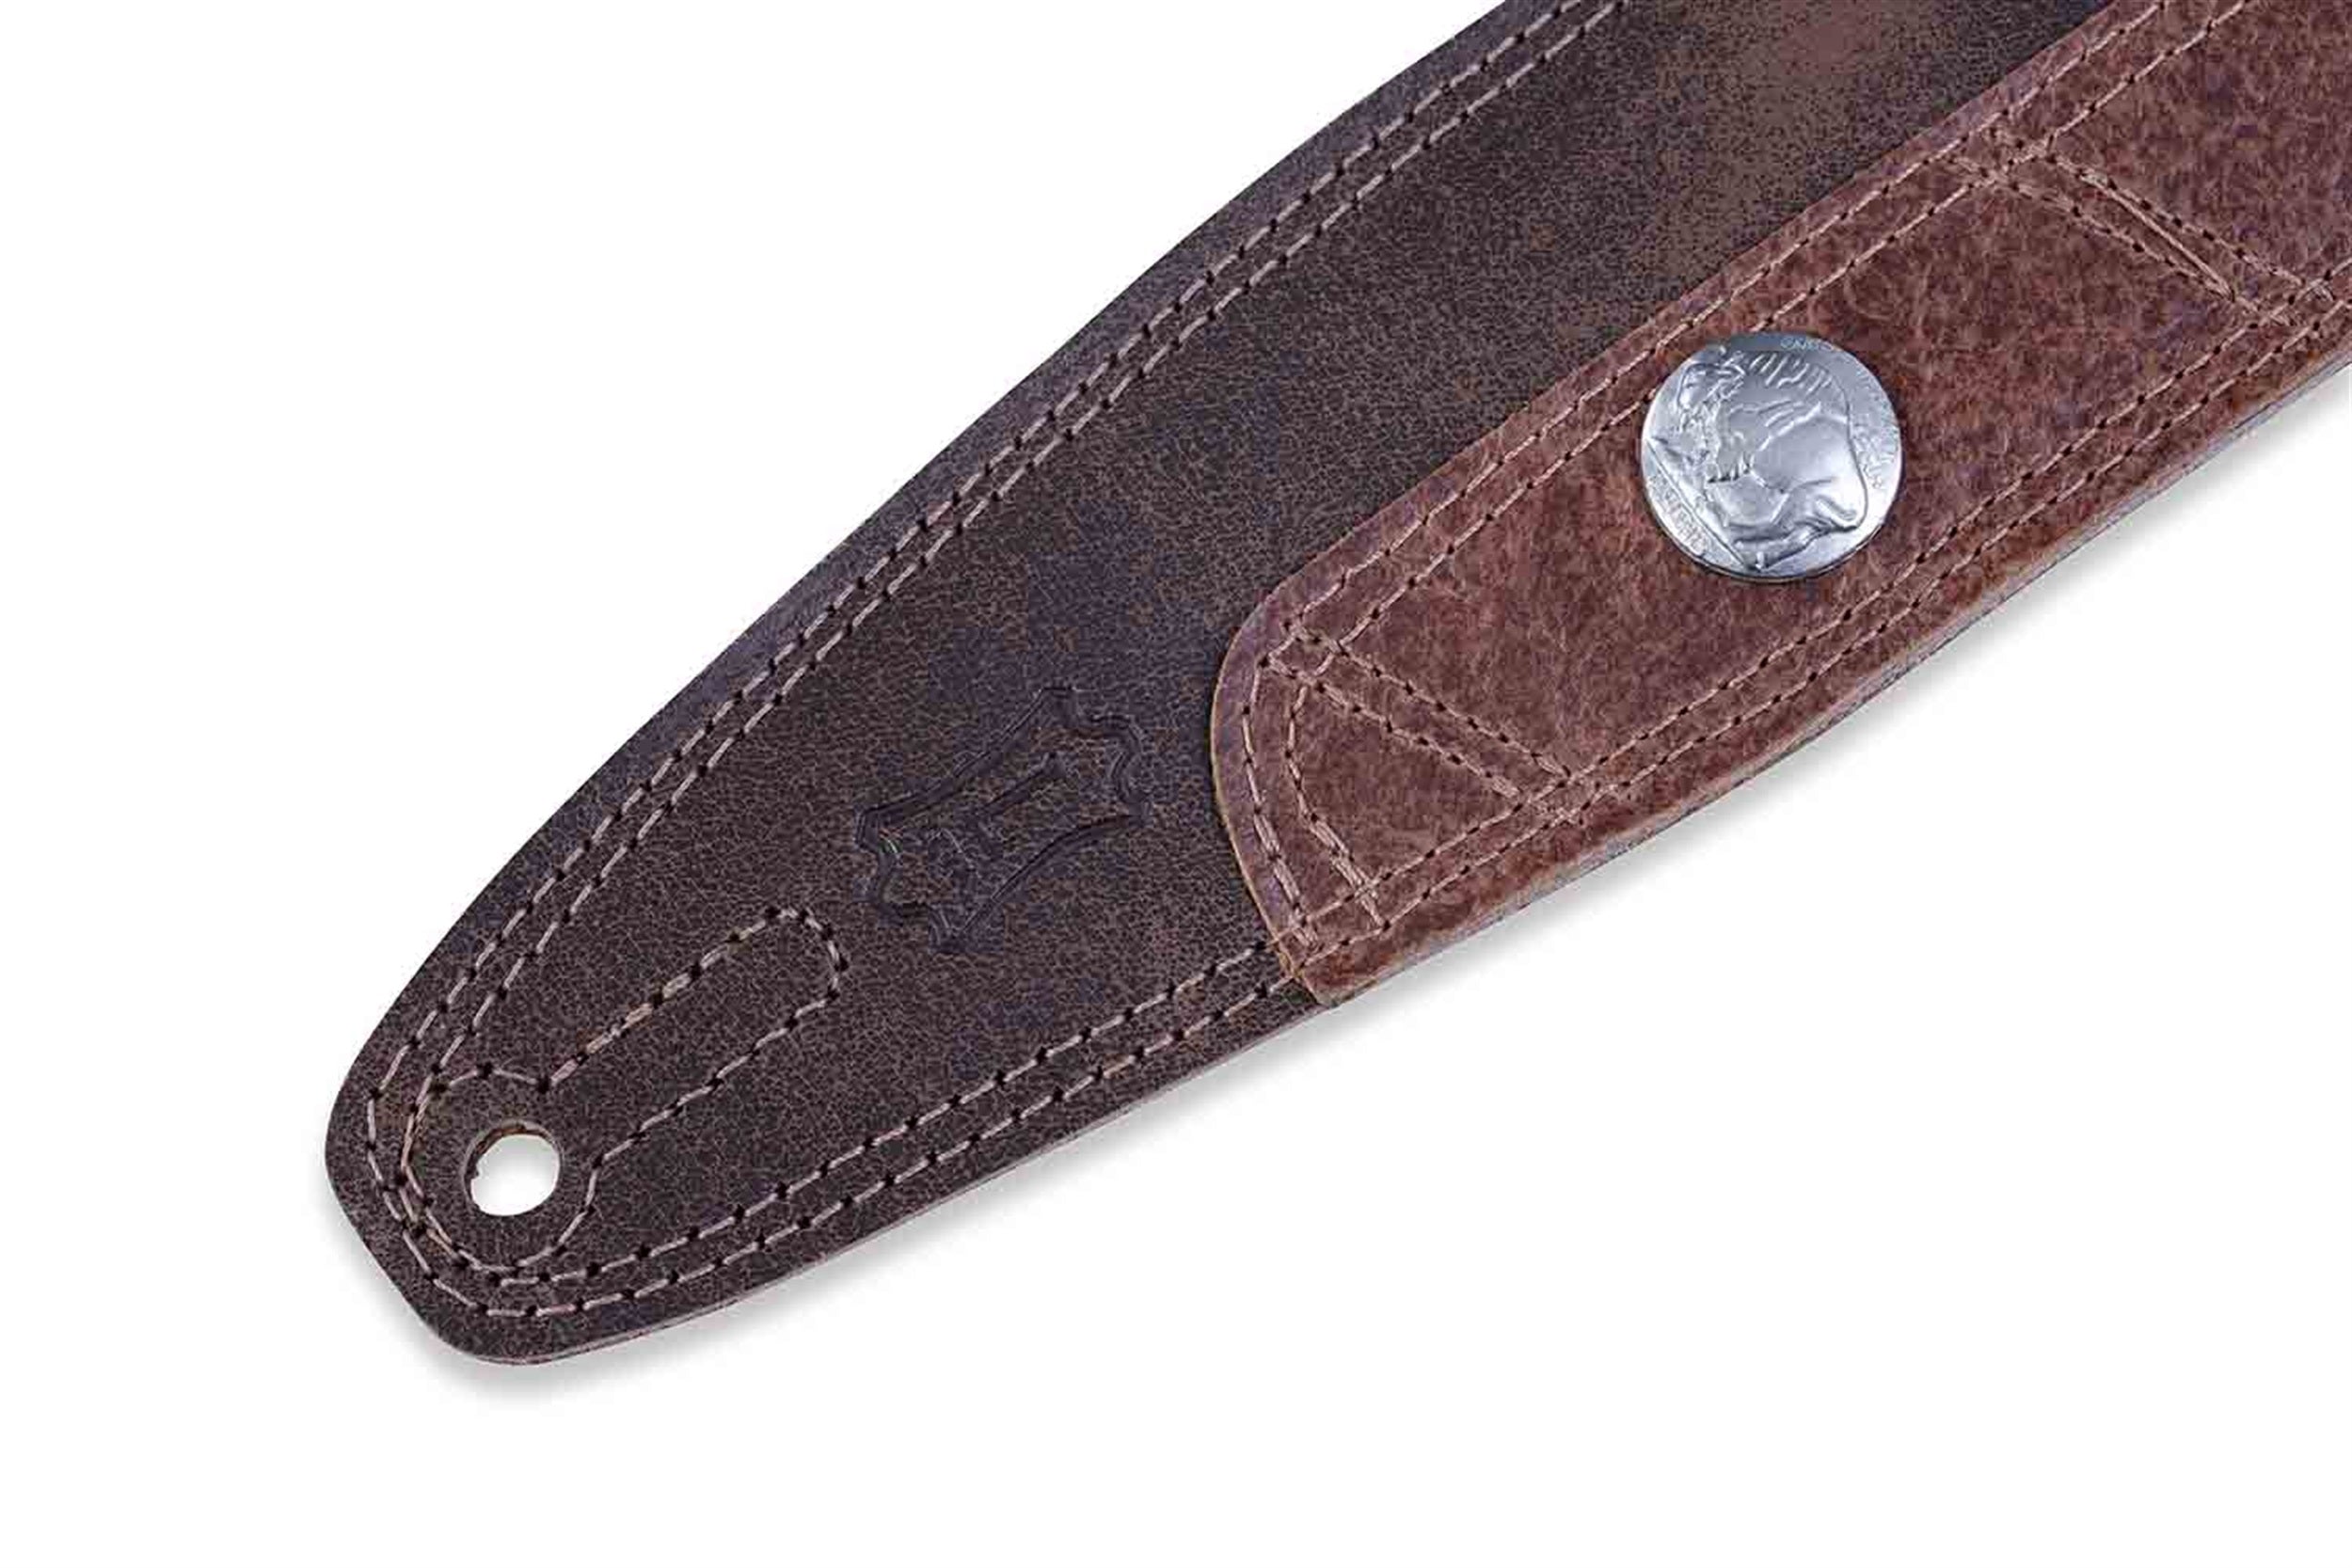 Levy's Leathers PMD4BU-DBR 2.5″ Suede Leather Guitar Strap - Brown - Hollywood DJ